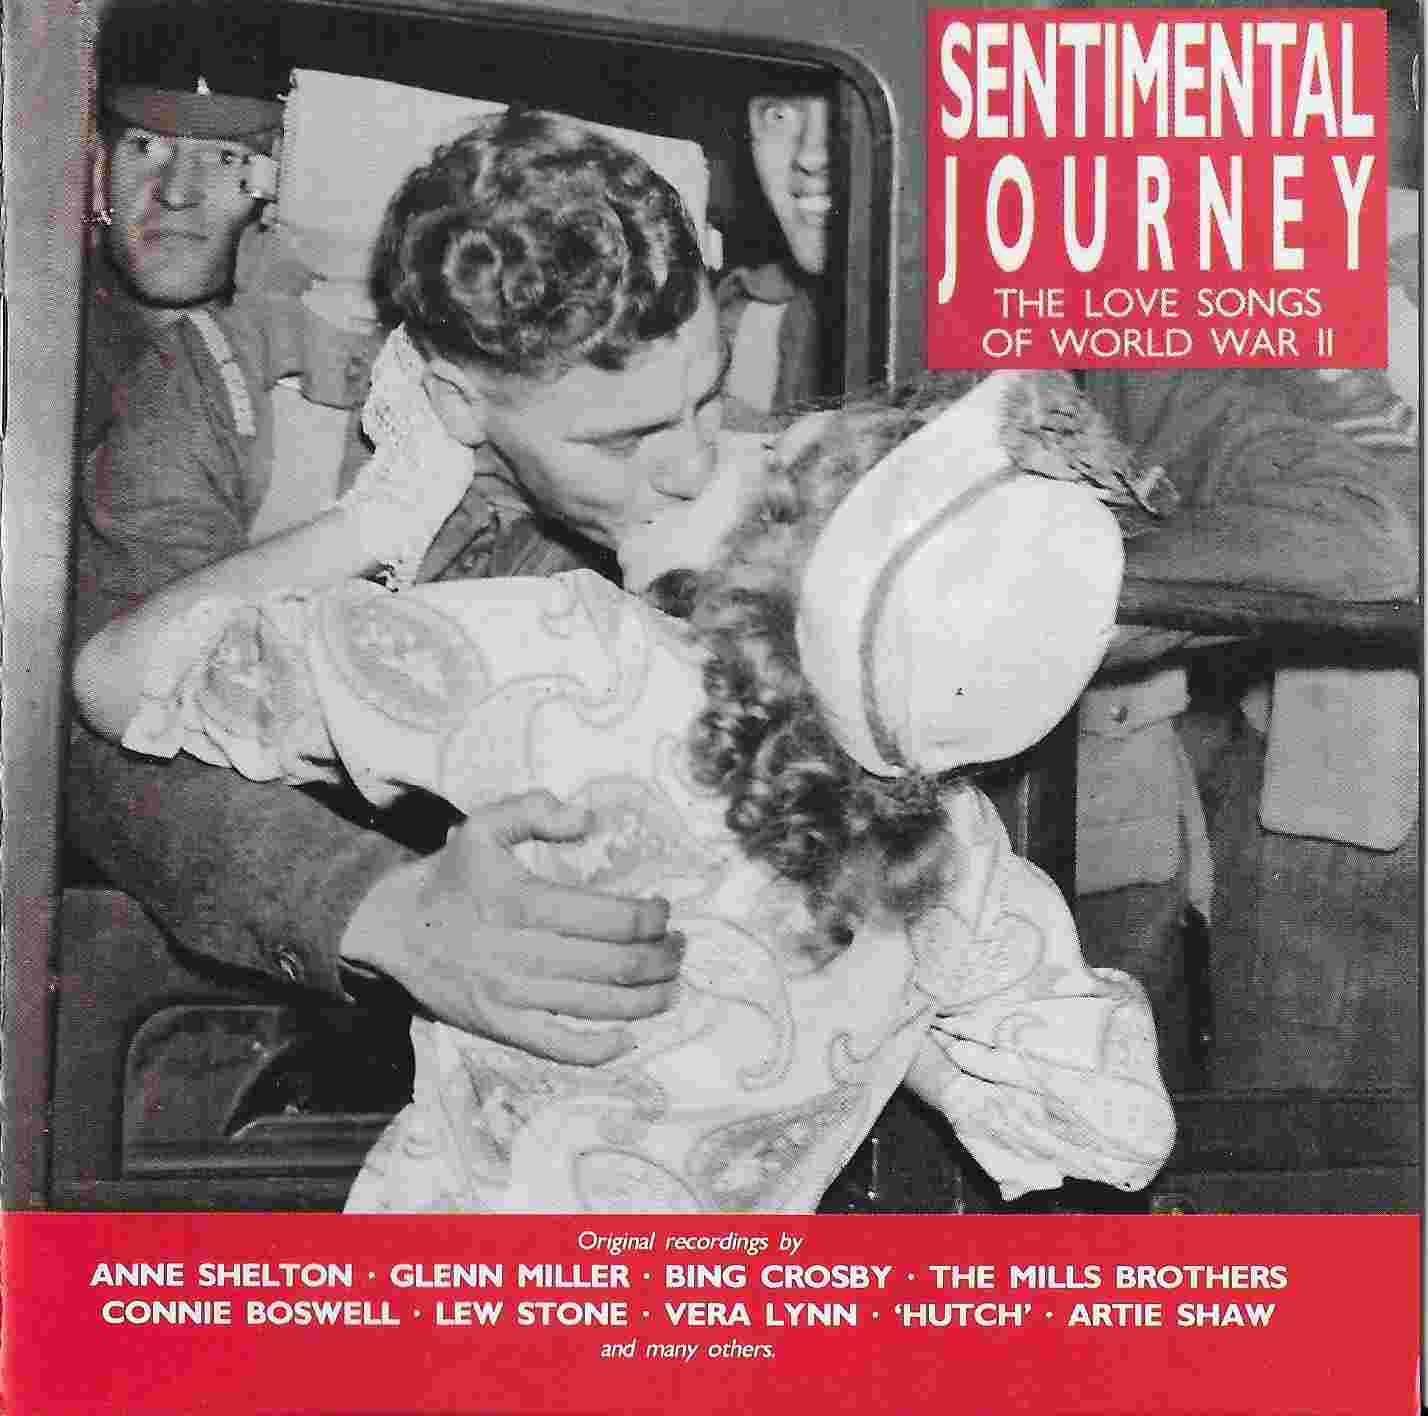 Picture of BBCCD2007 Sentimental journey by artist Various from the BBC cds - Records and Tapes library